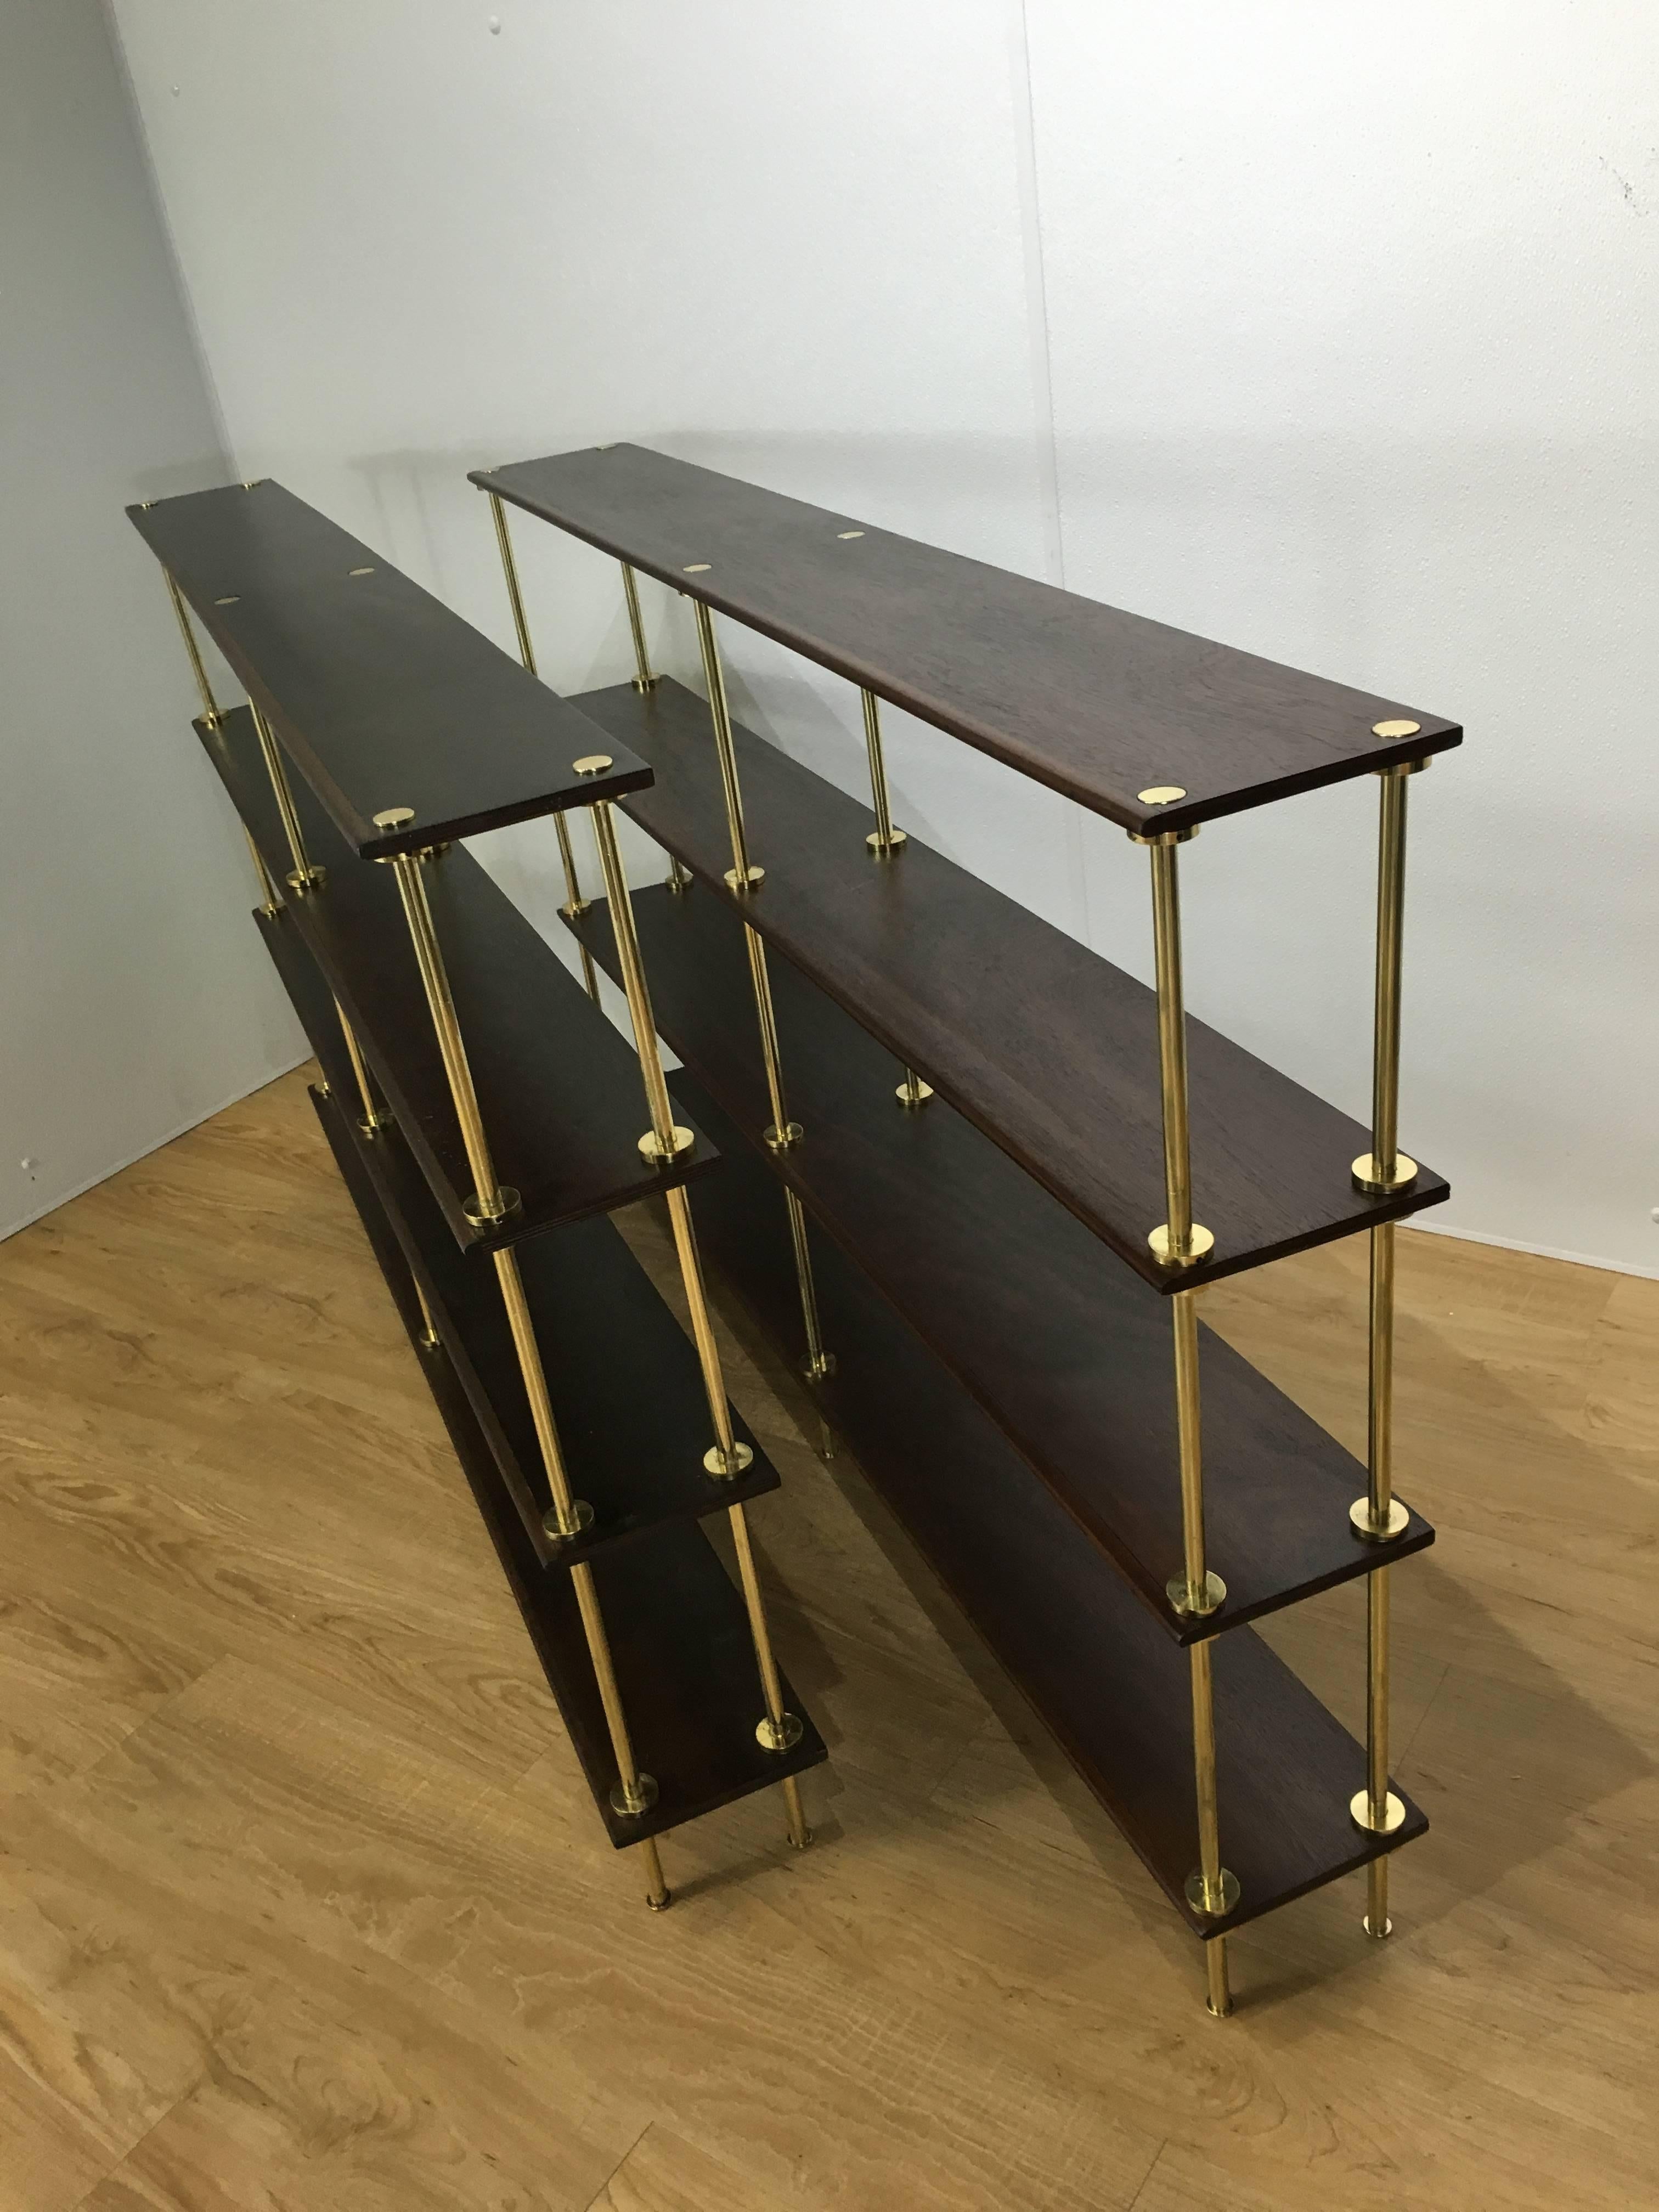 Polished Near Pair of Diminutive Campaign Bookcases For Sale